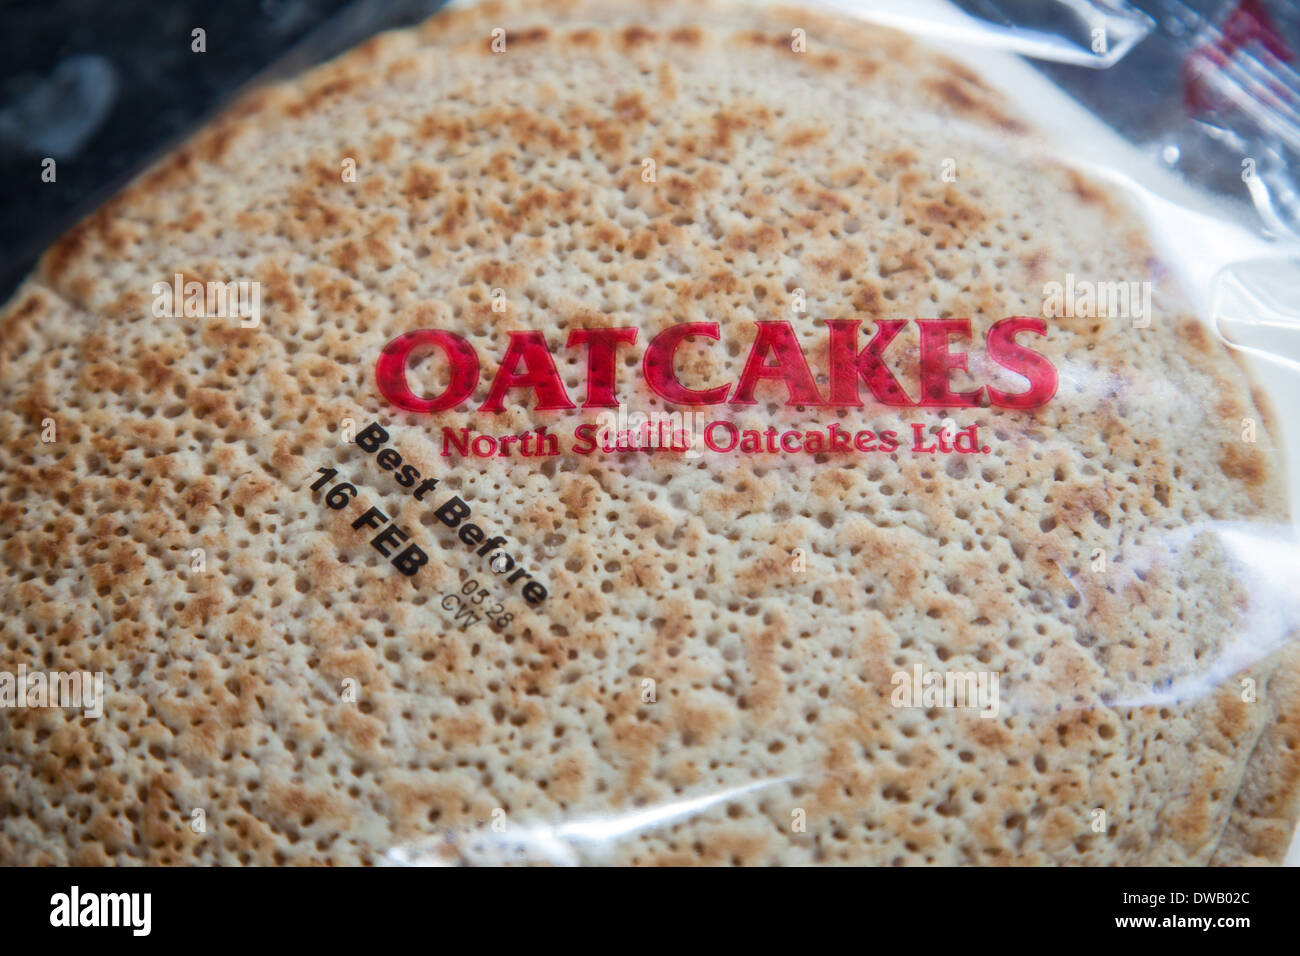 A packet of North Staffordshire oatcakes, a regional food delicacy, Stoke-on-Trent, Staffordshire, England, UK Stock Photo